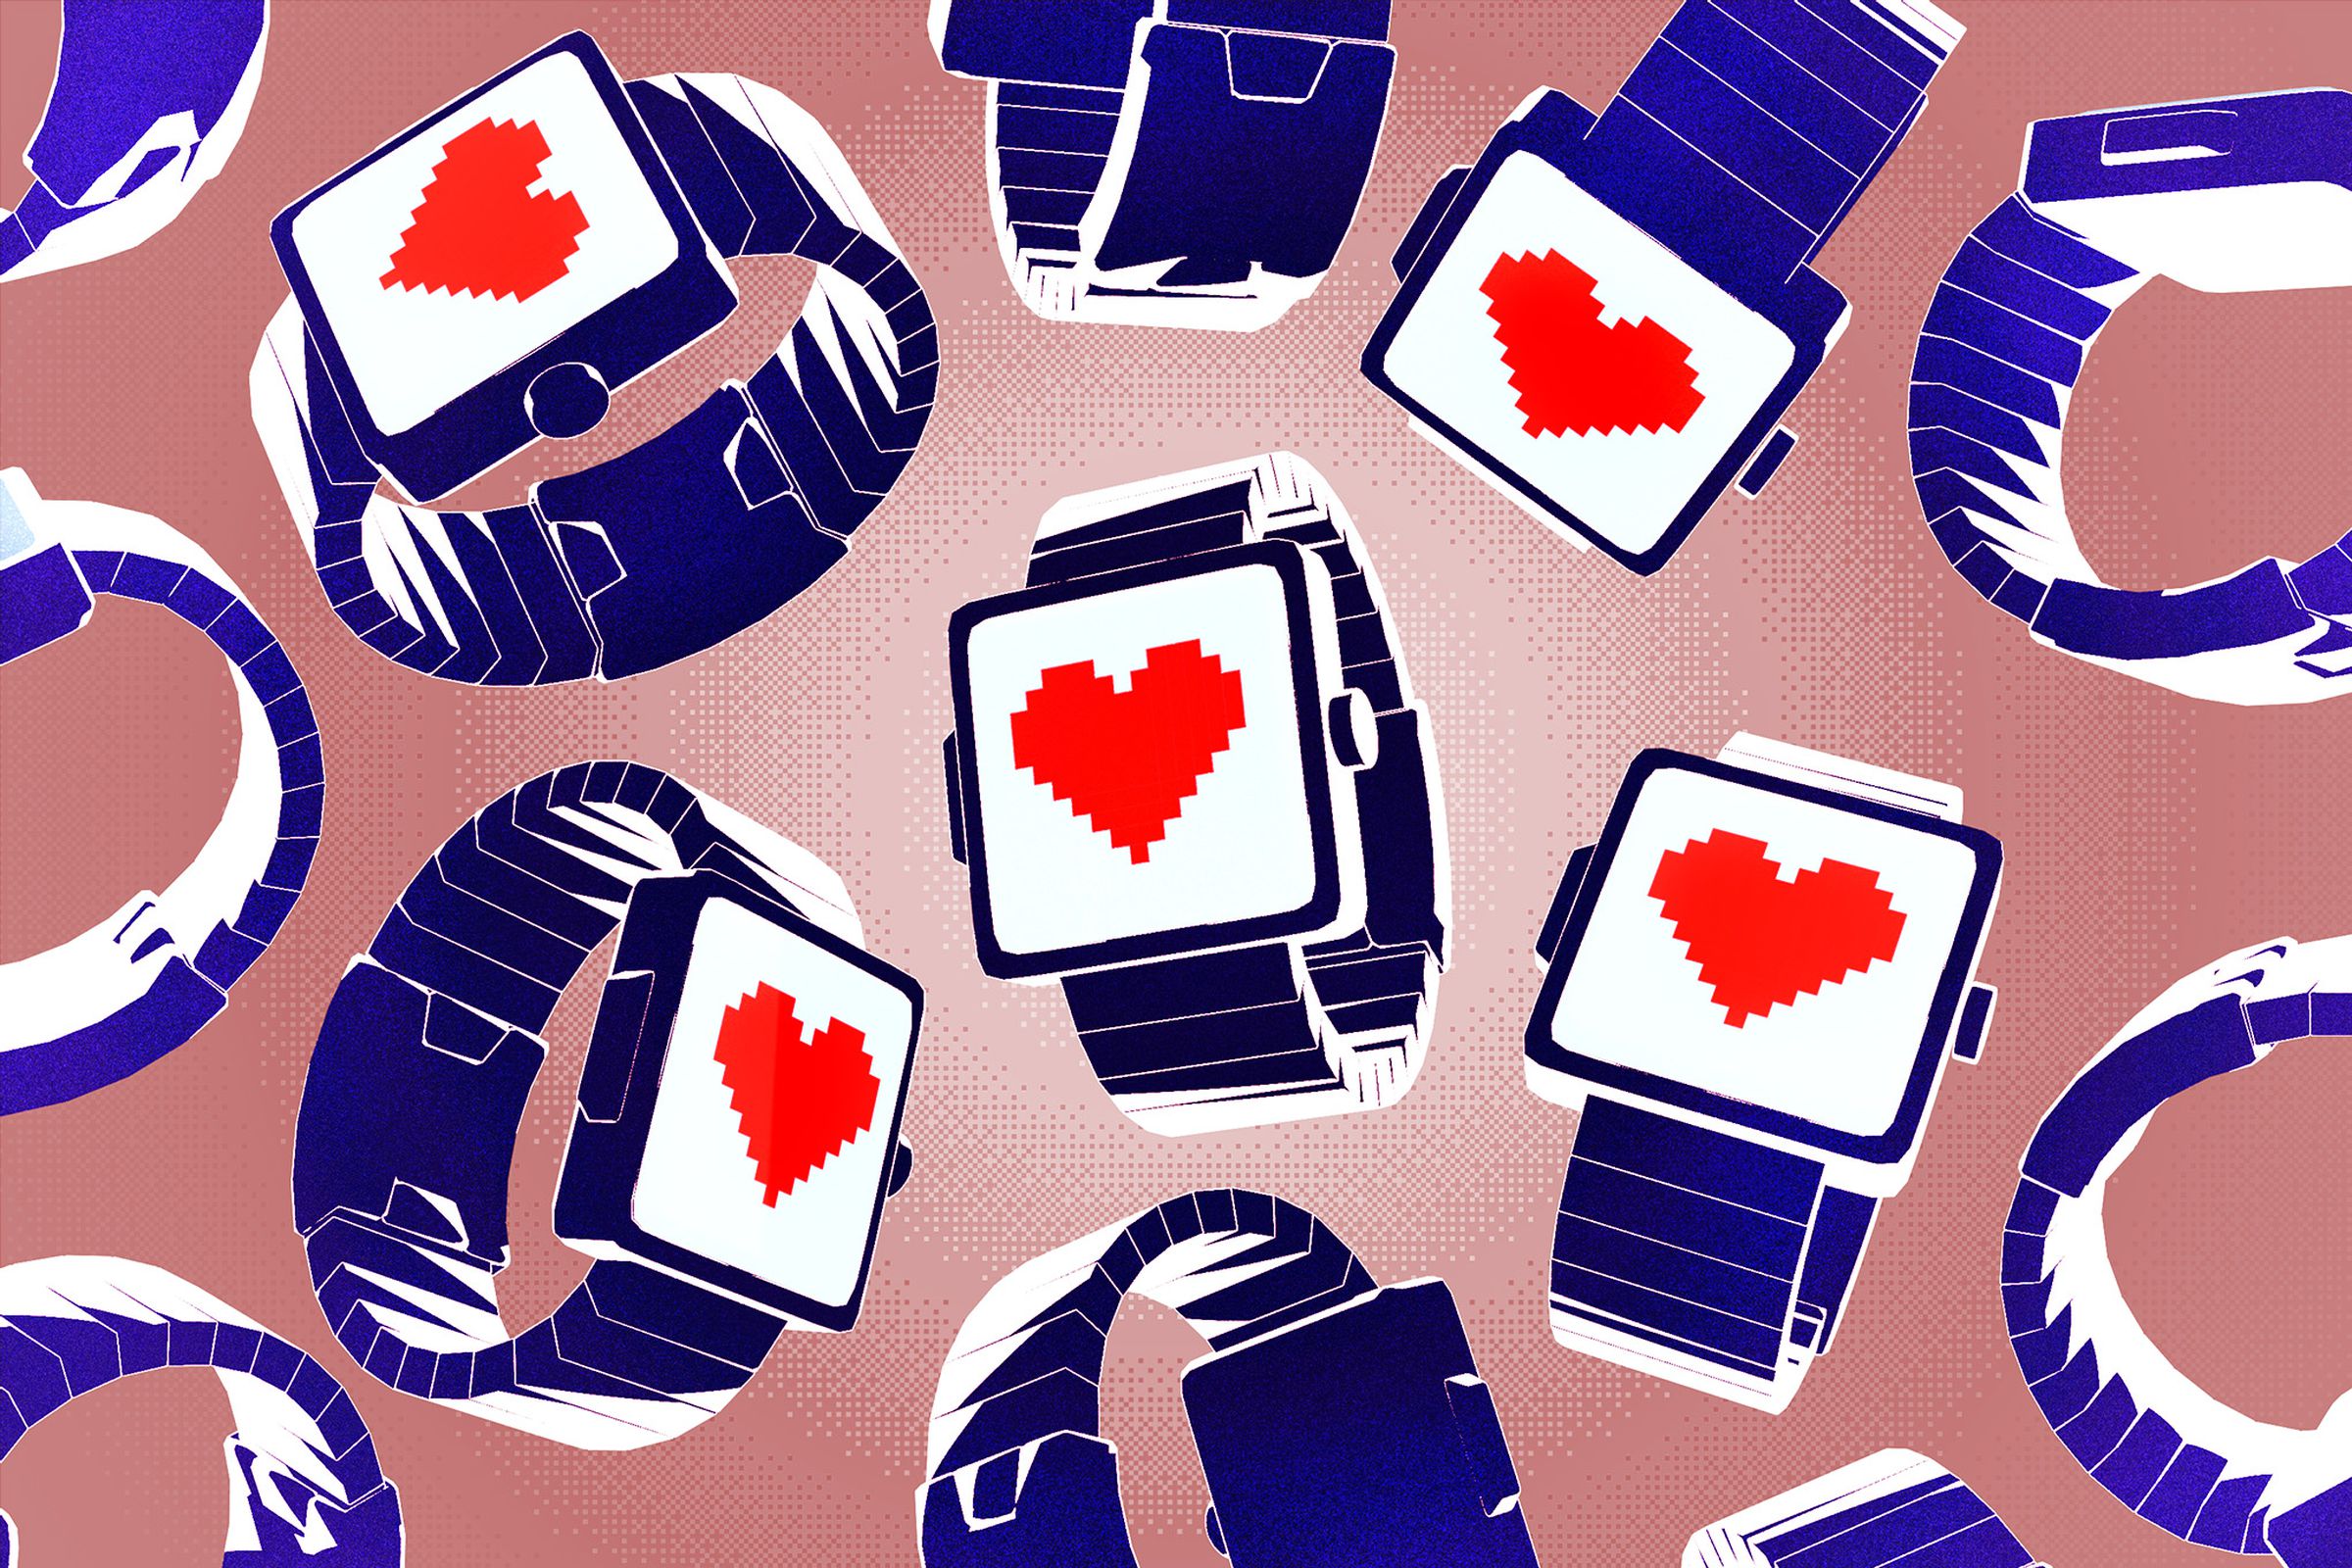 Smartwatches showing heart signs on their screens.